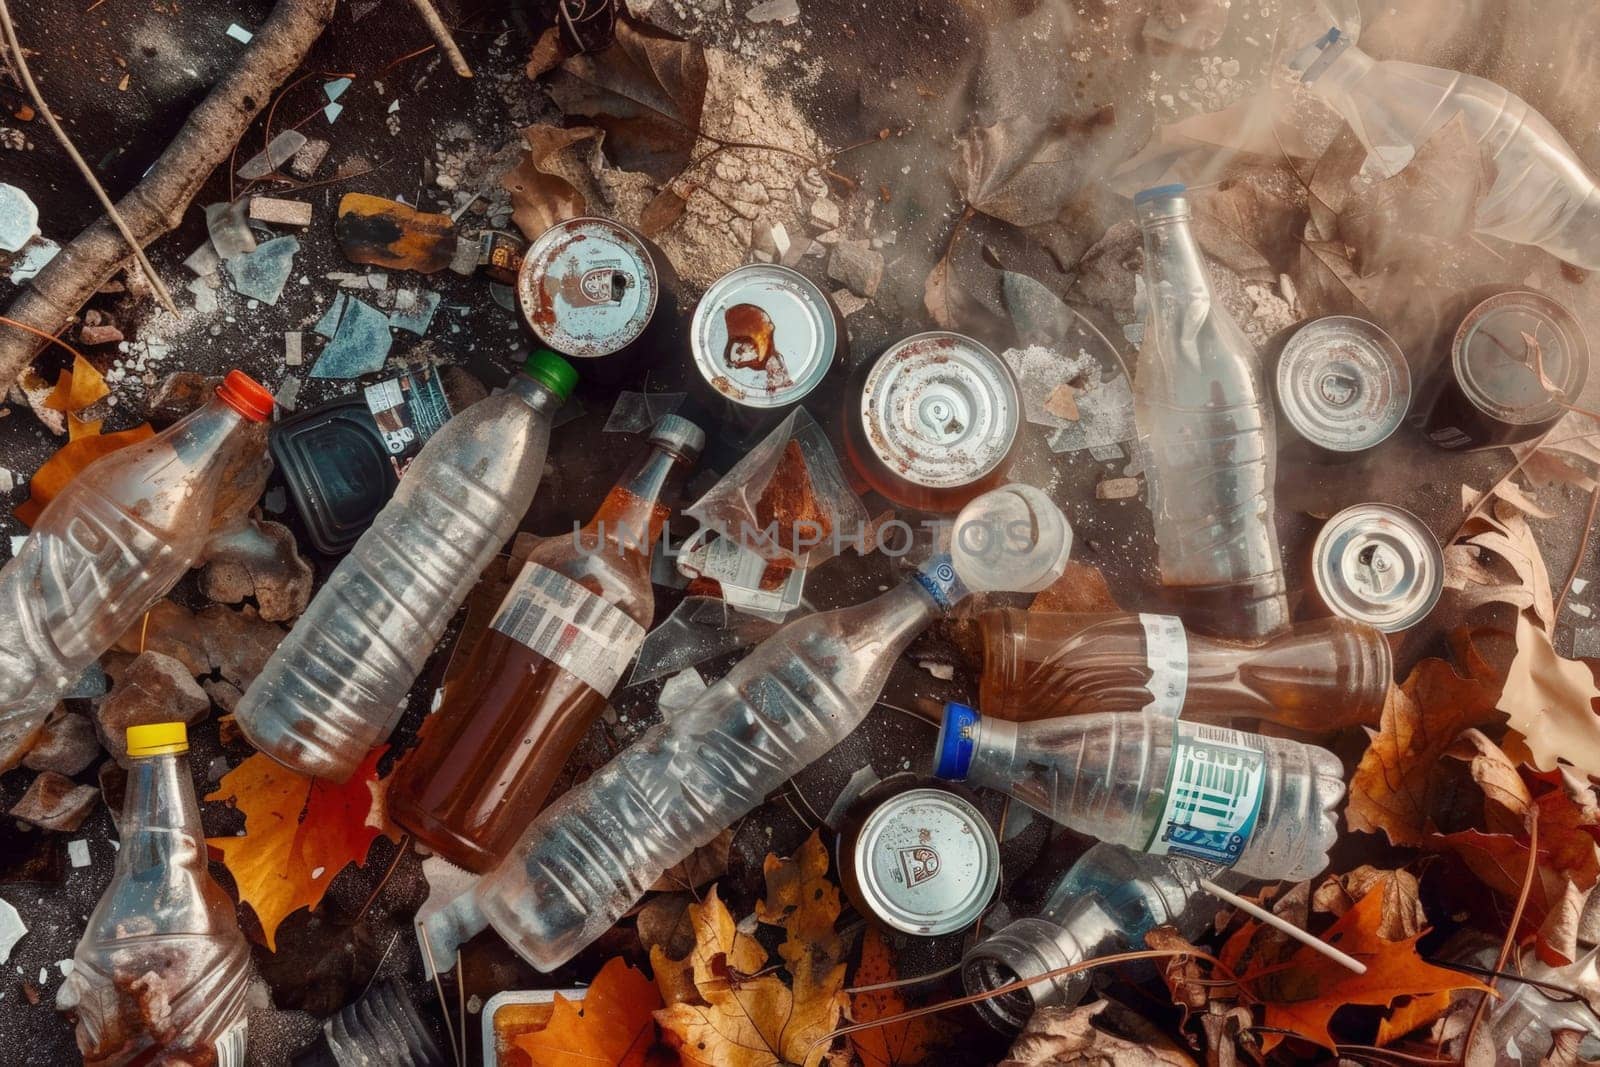 A pile of trash including bottles, cans, and other debris. Scene is one of waste and pollution